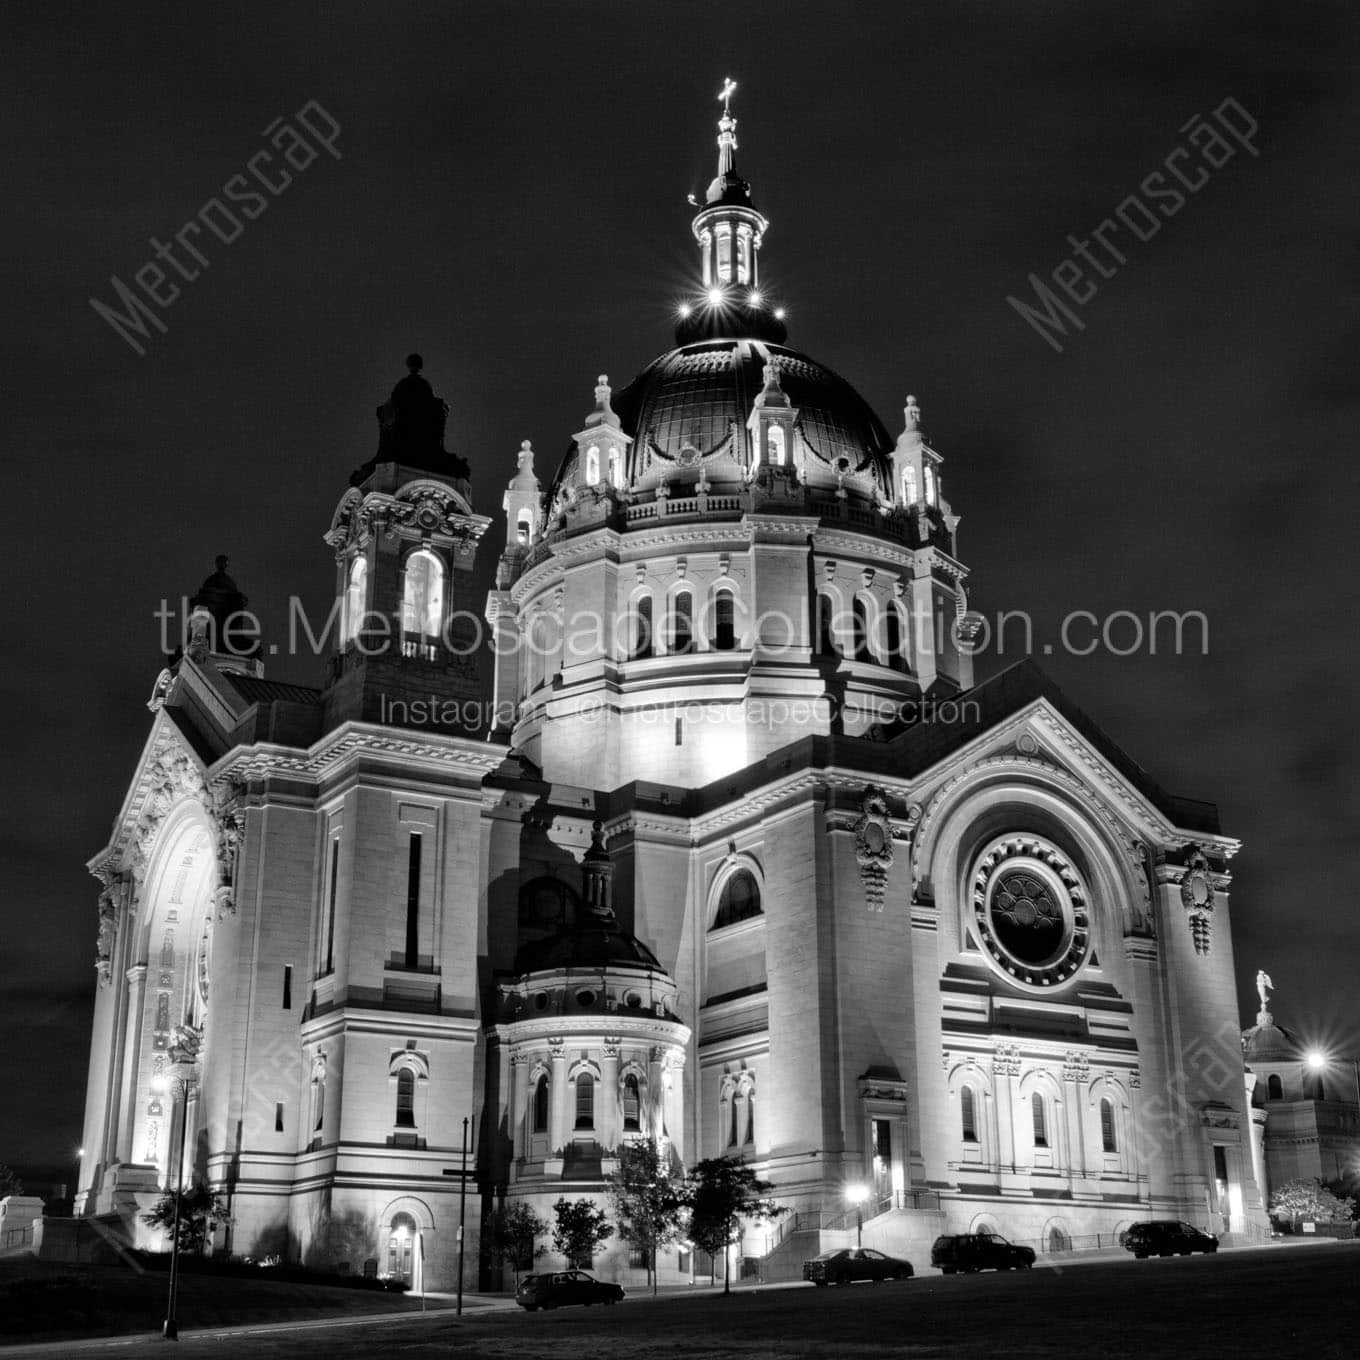 st paul cathedral at night Black & White Office Art